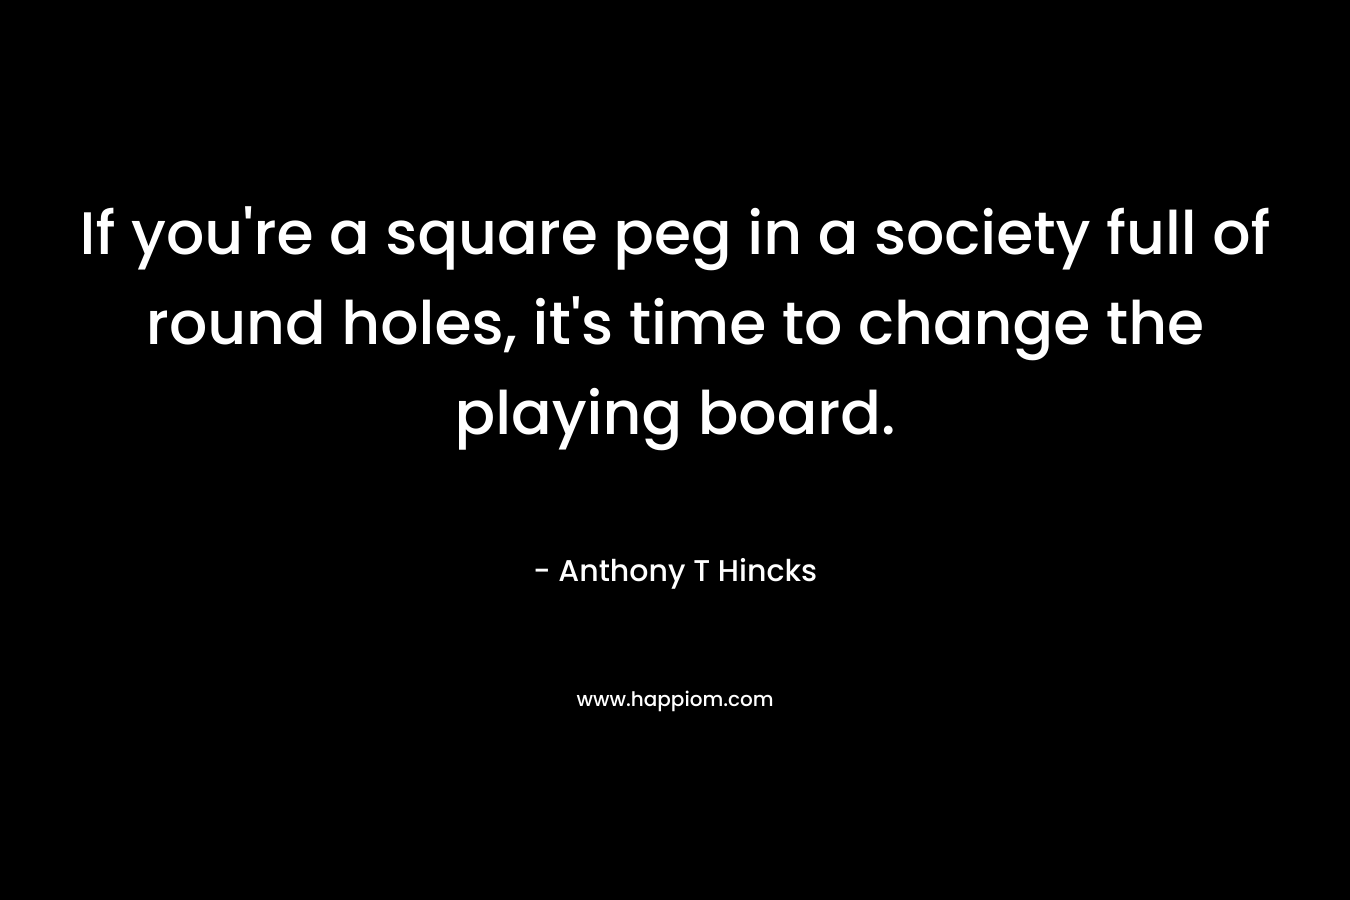 If you're a square peg in a society full of round holes, it's time to change the playing board.